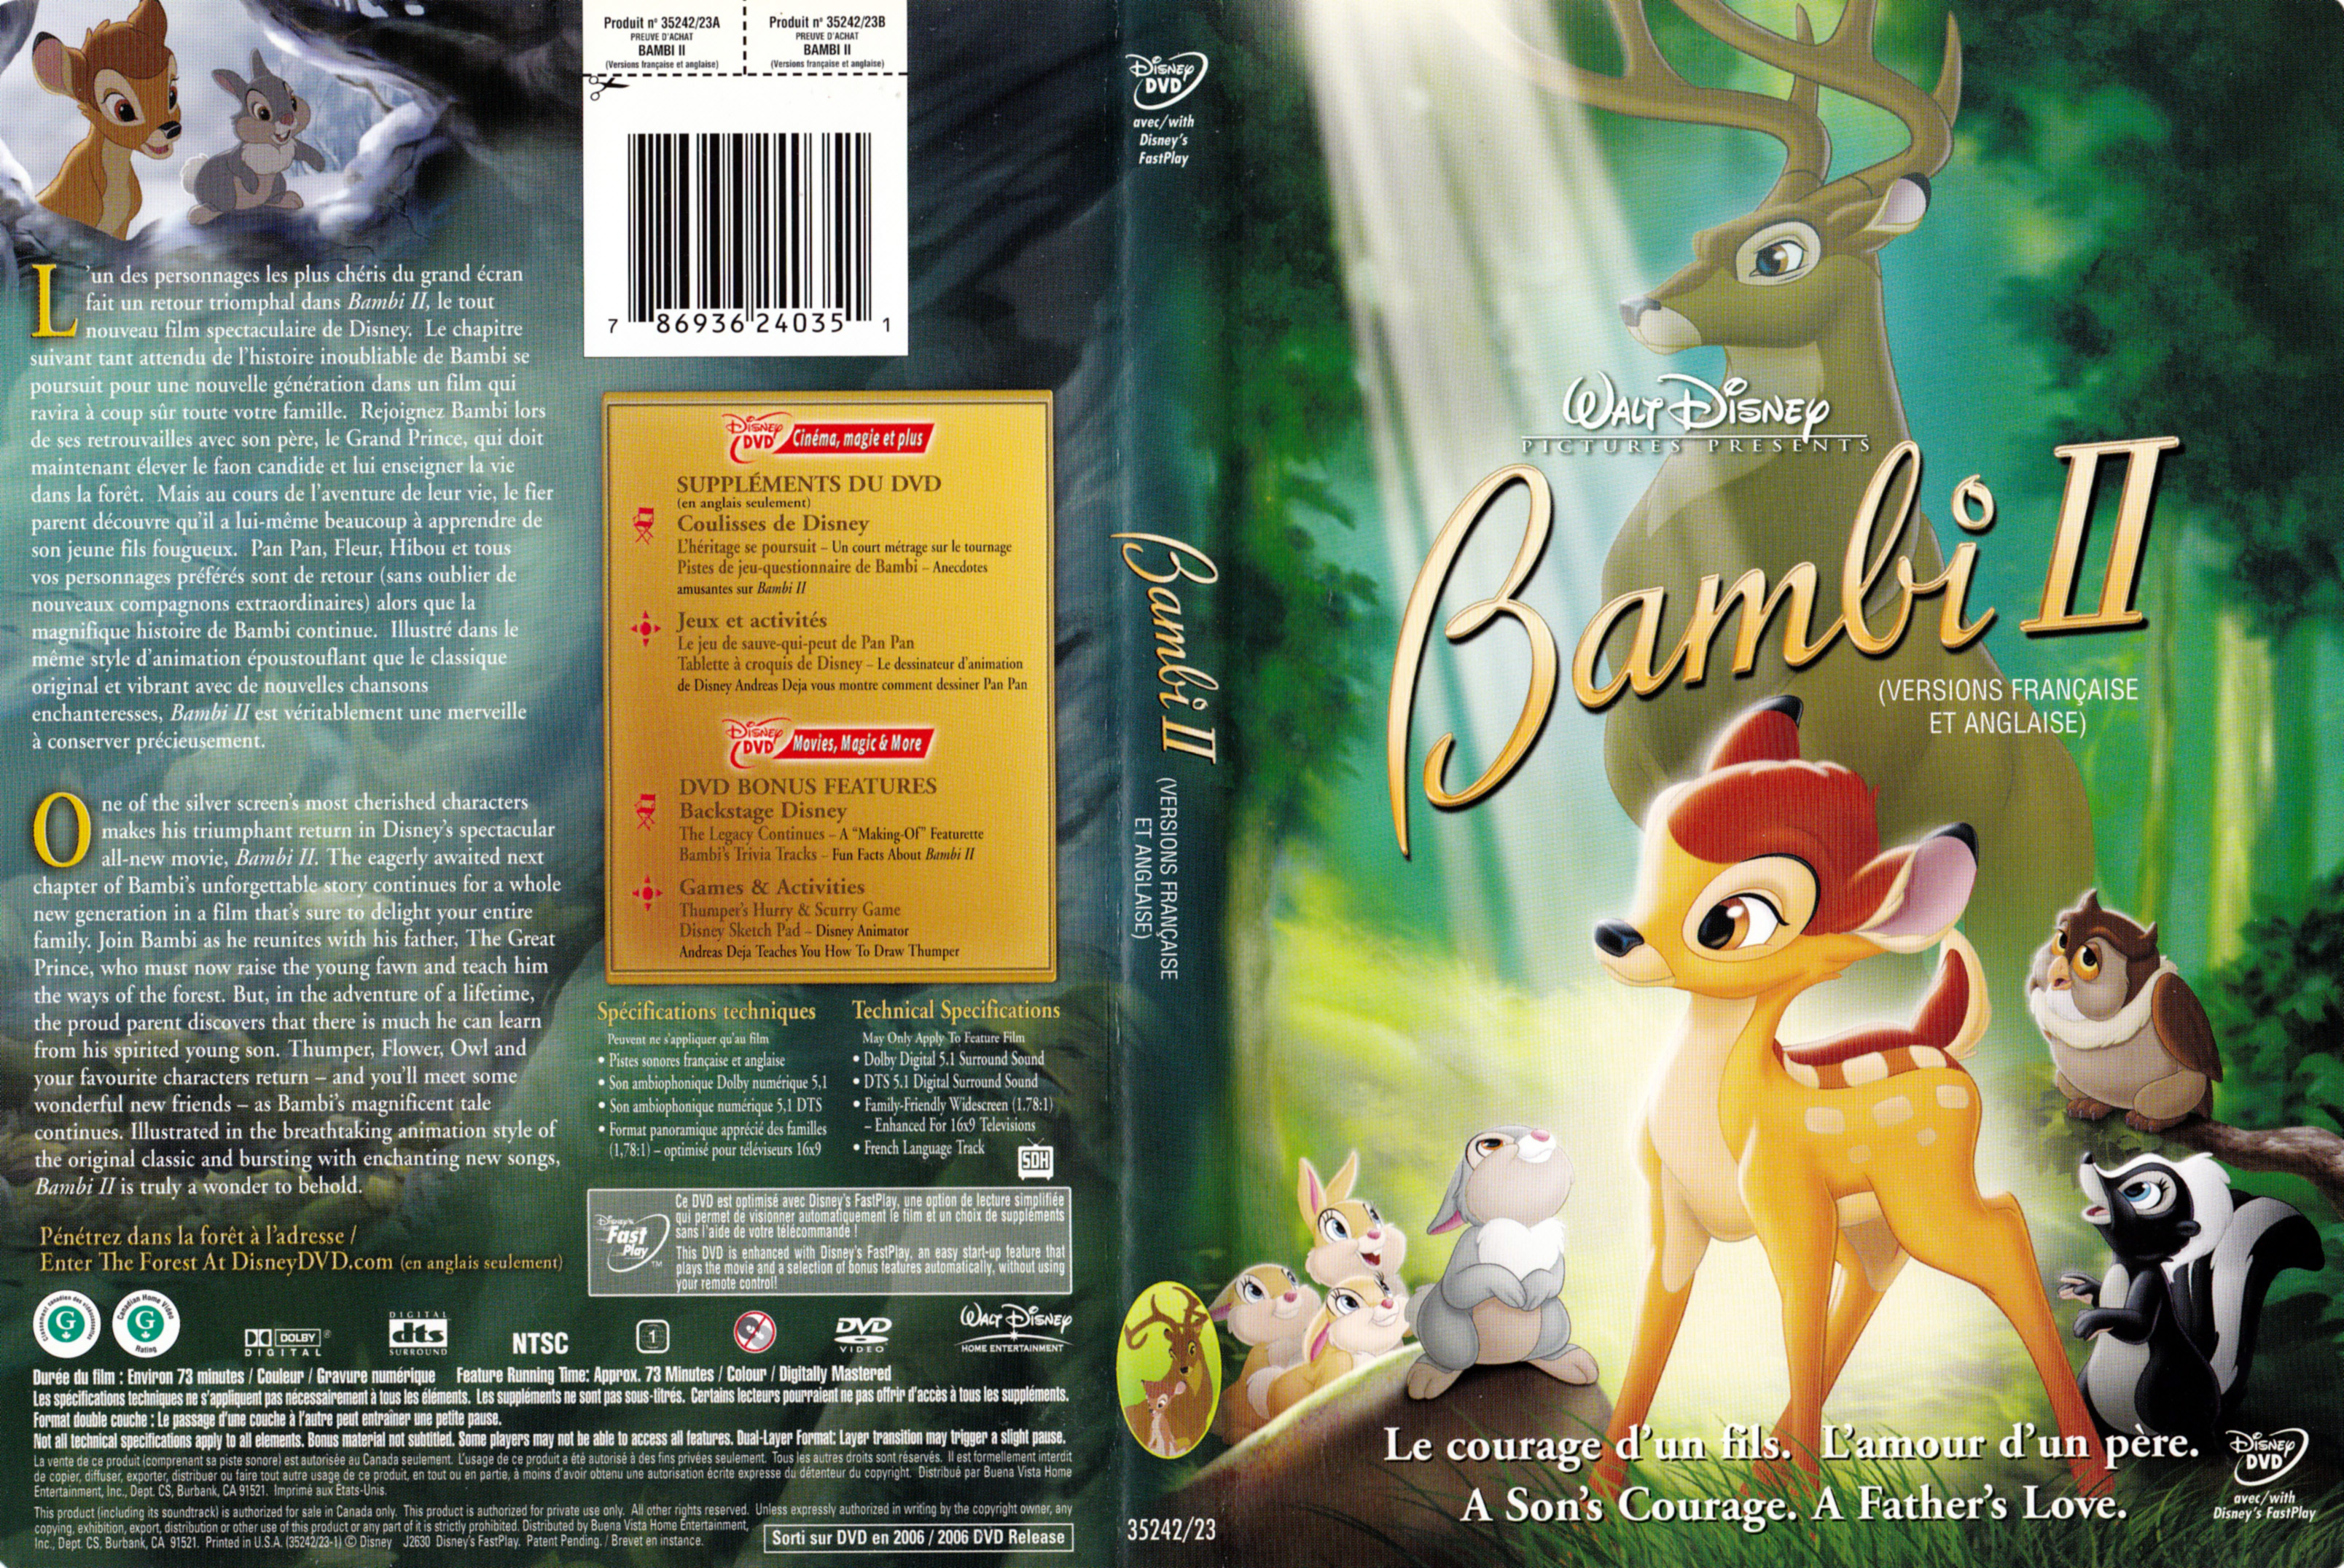 Jaquette DVD Bambi 2 (Canadienne)